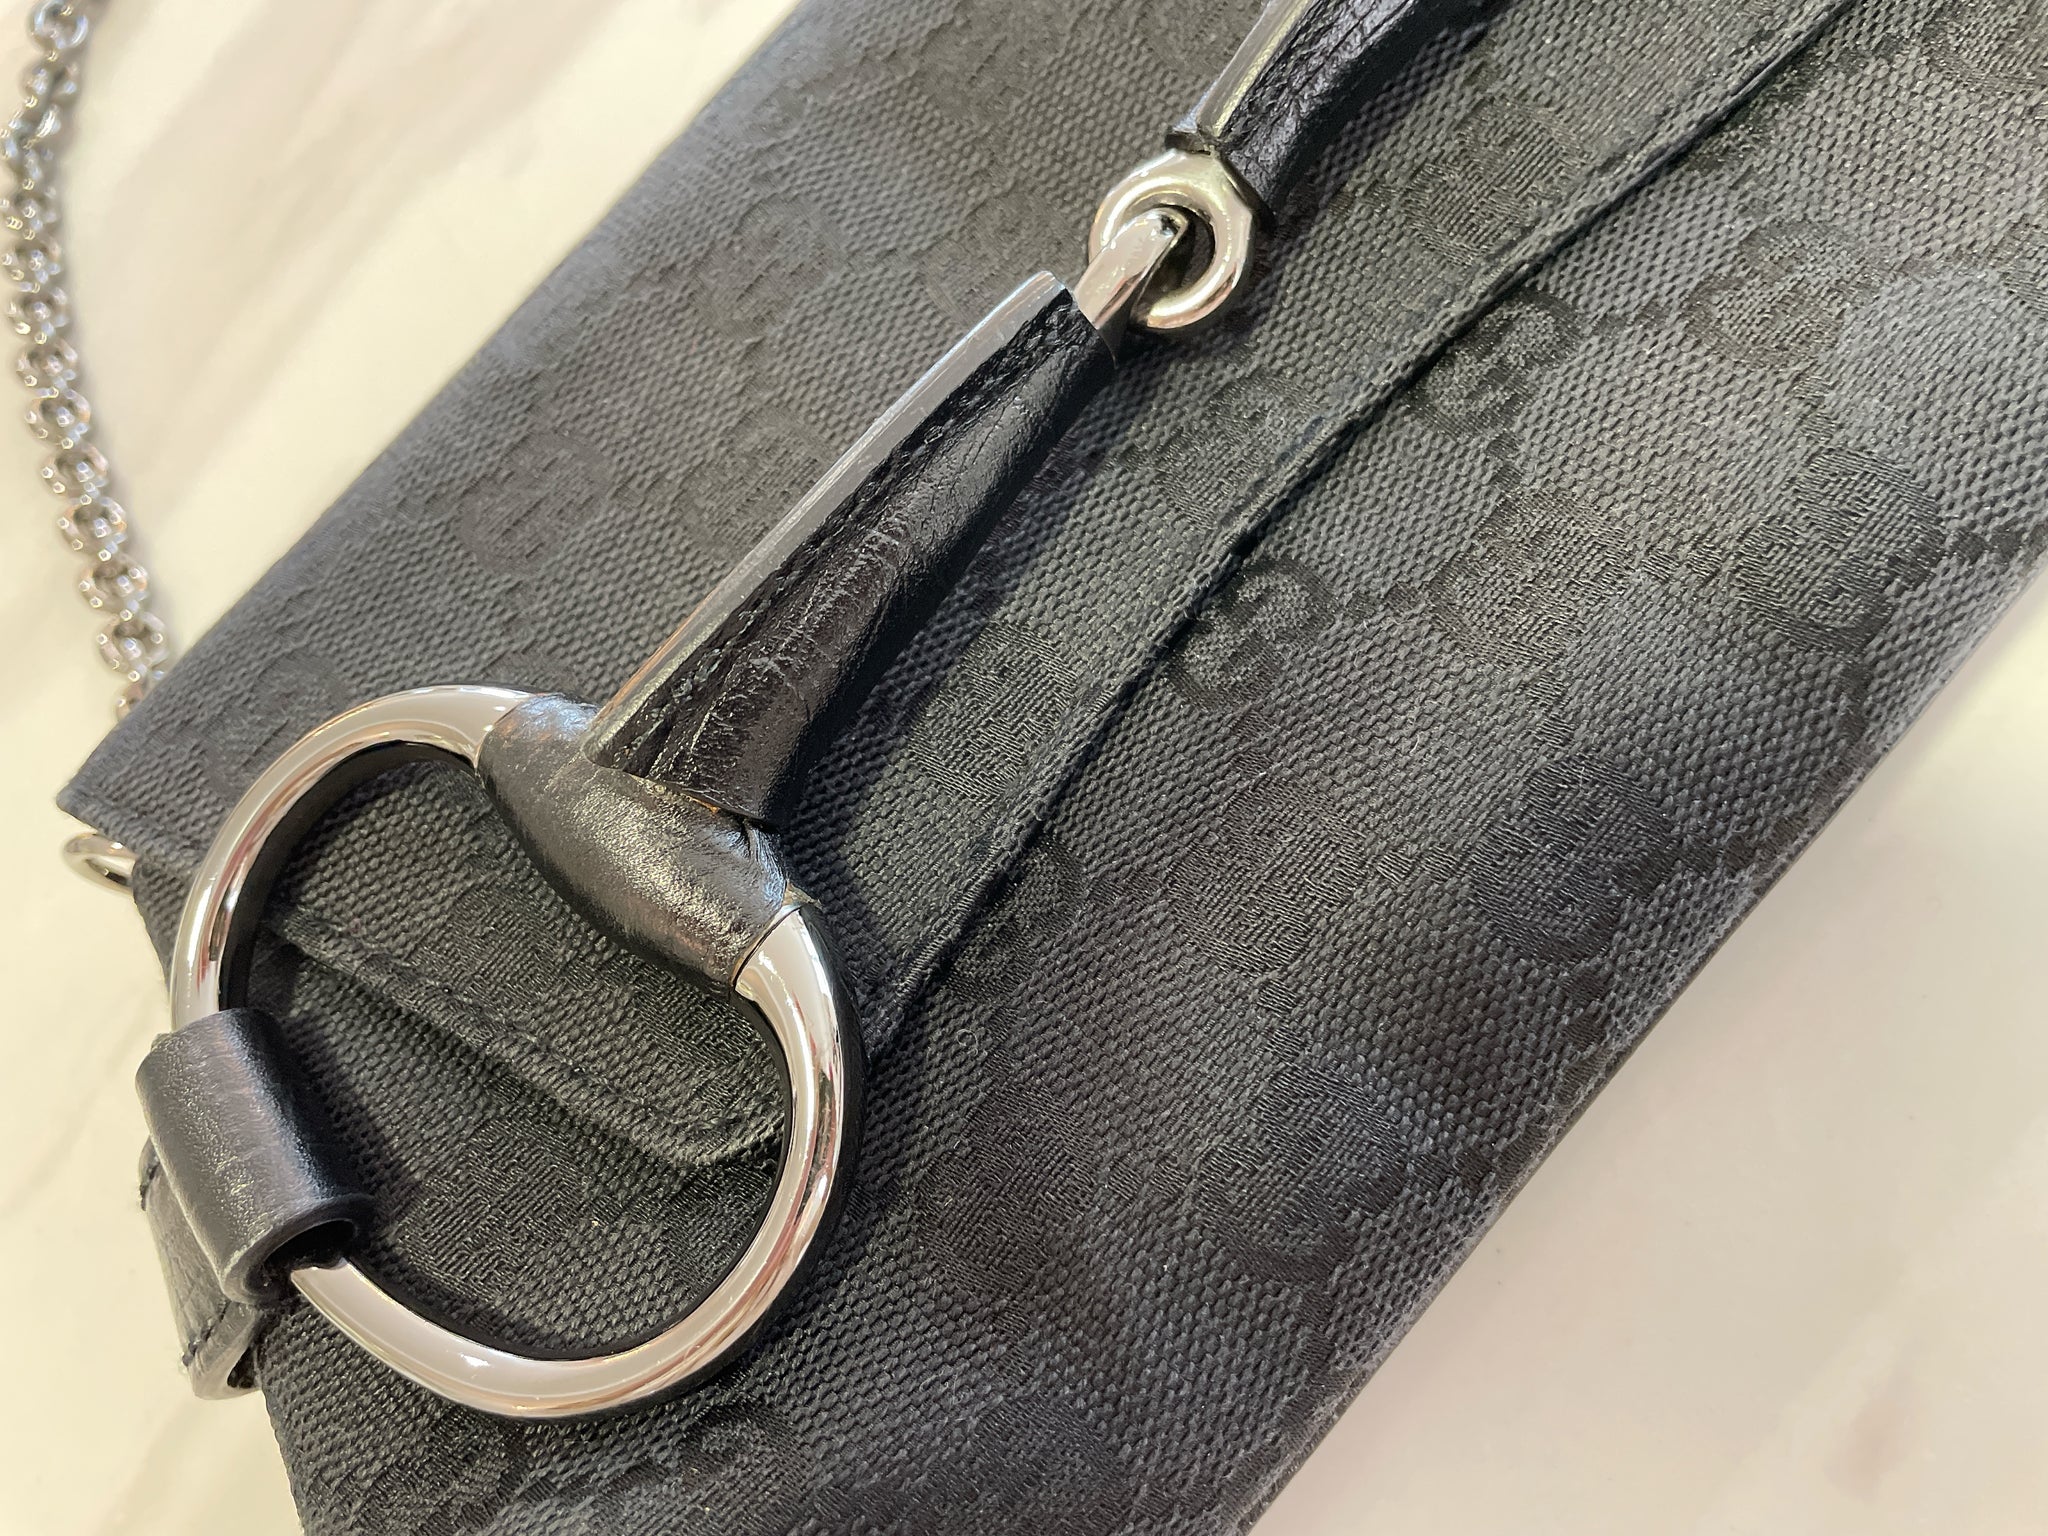 Gucci Horsebit Black Leather bag by Tom Ford